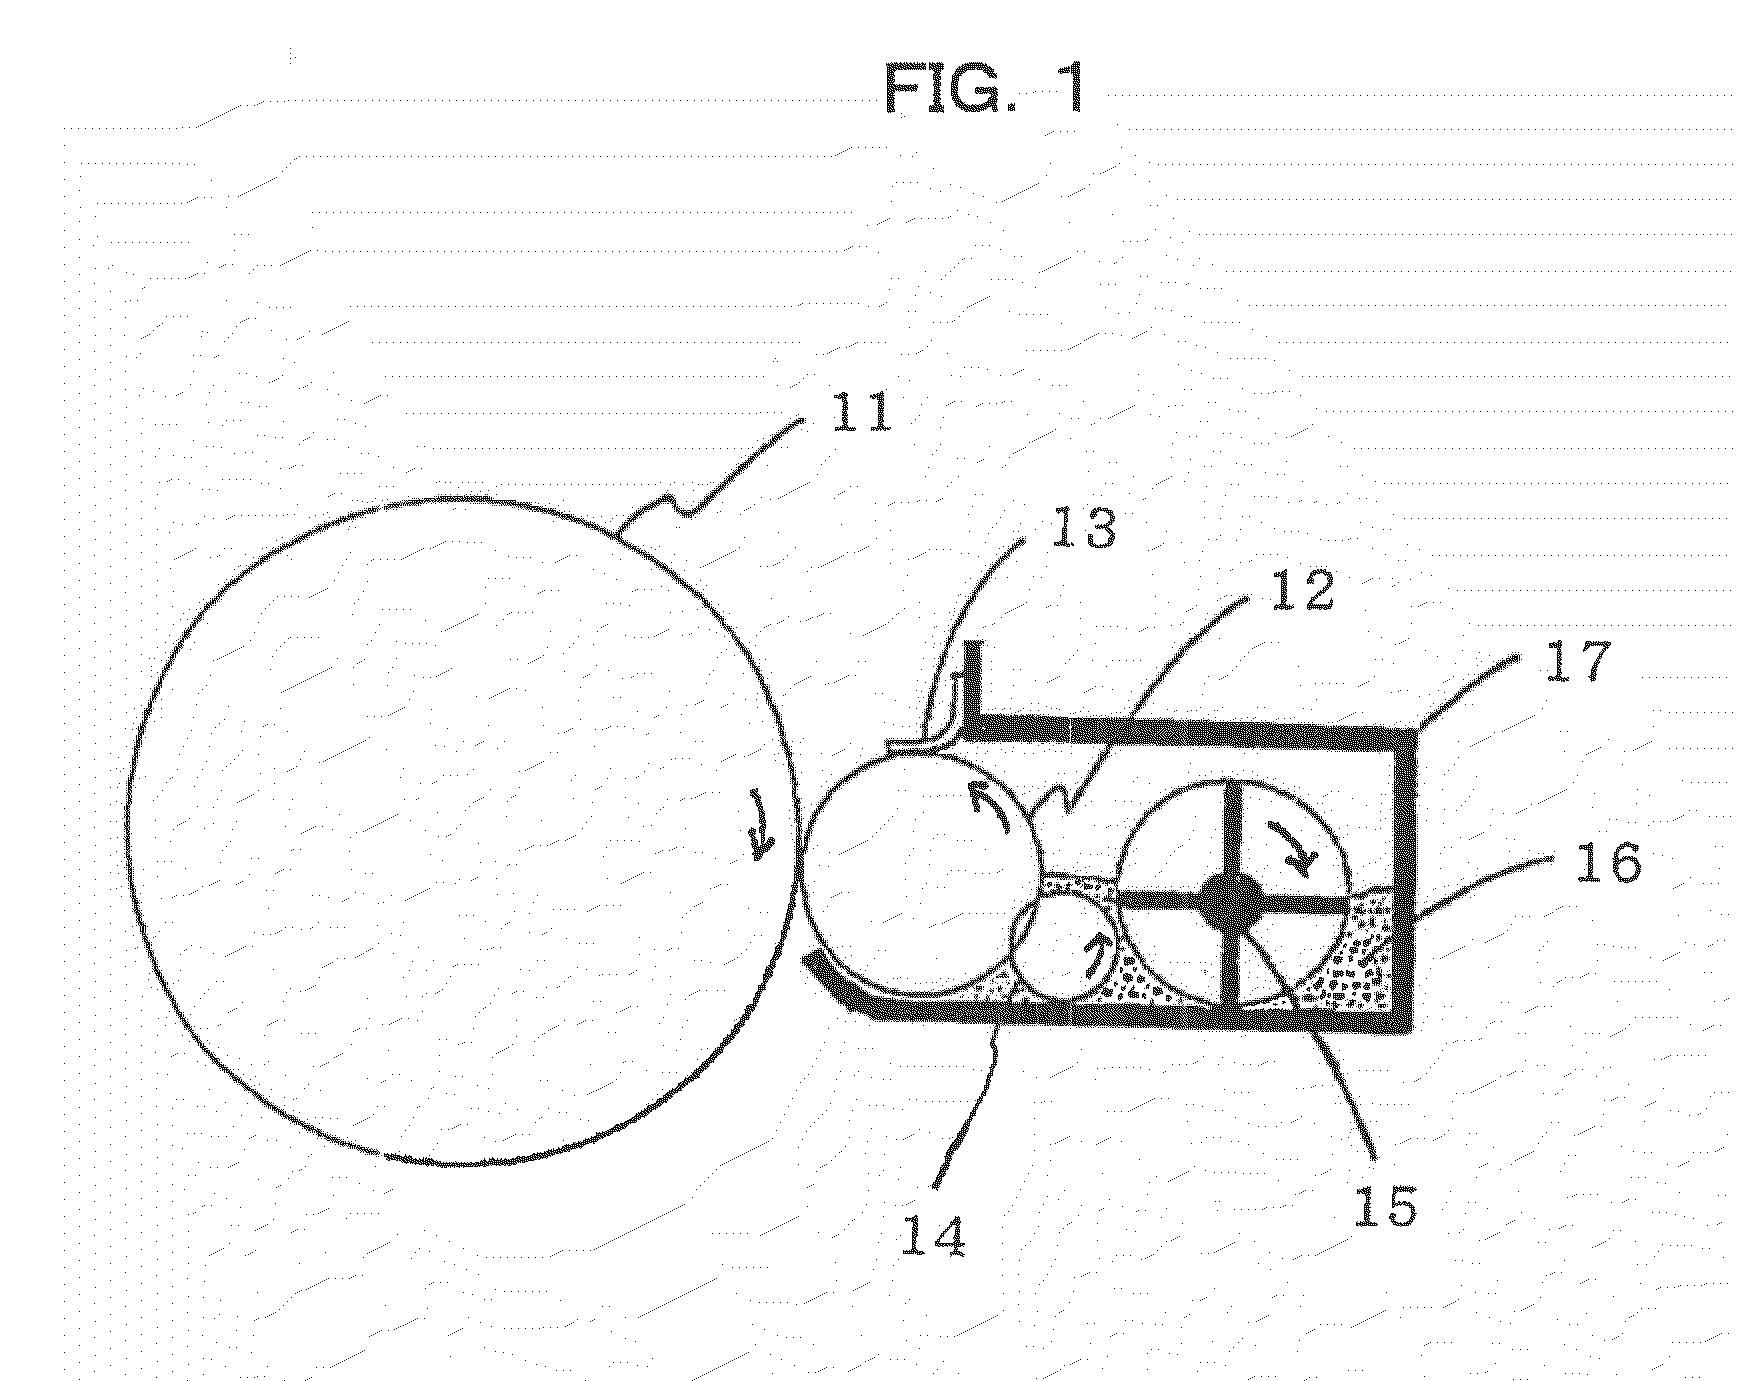 Image-forming apparatus and cartridge